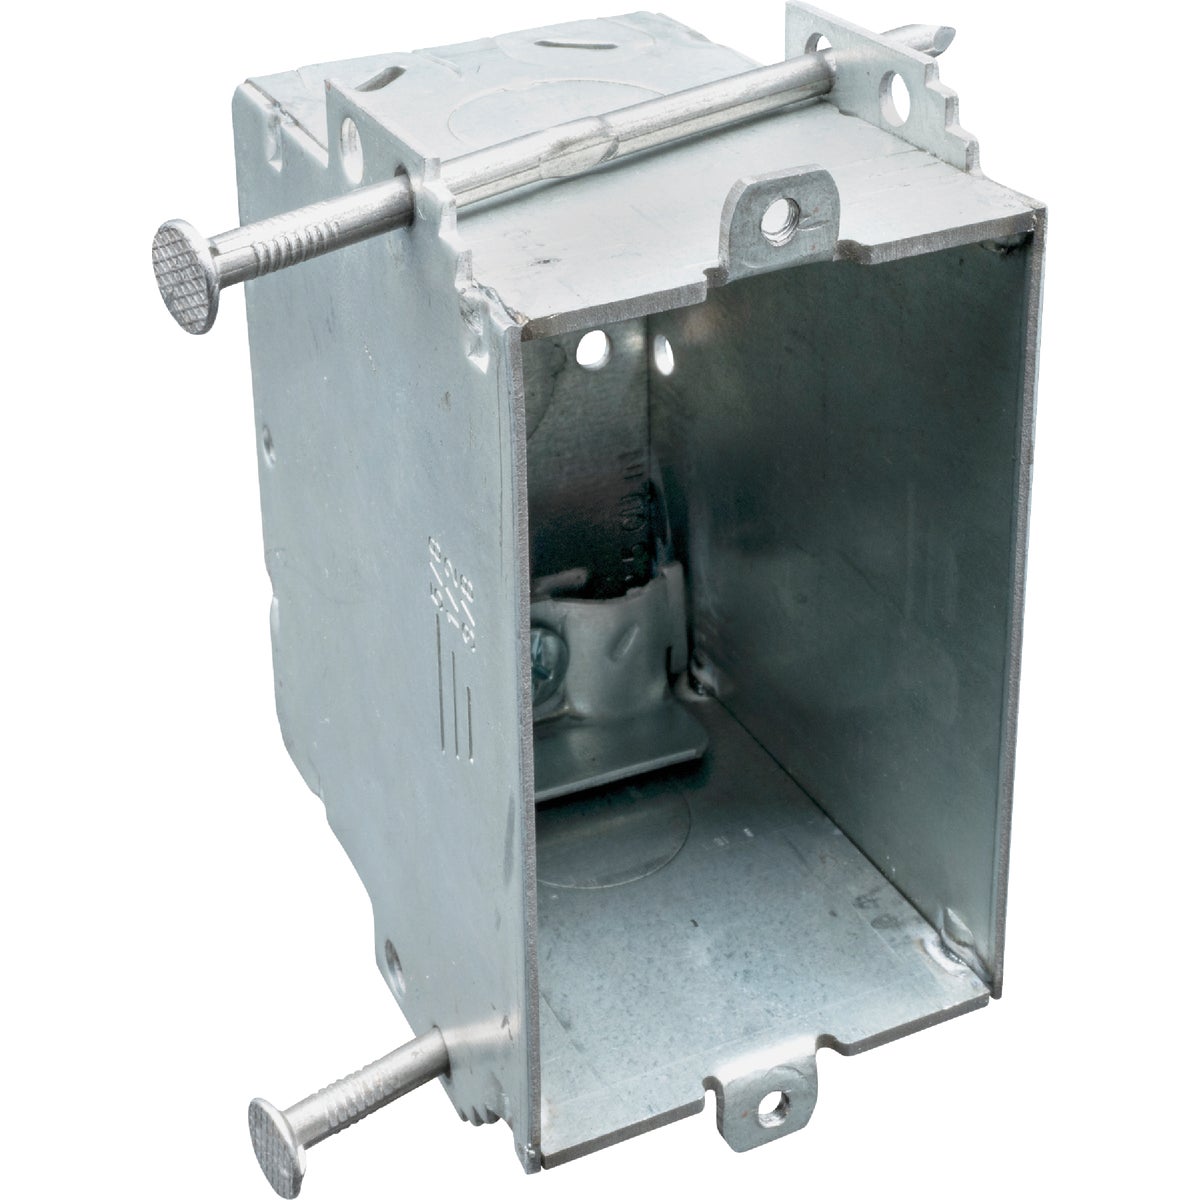 Item 522170, Durable welded steel electrical wall box.